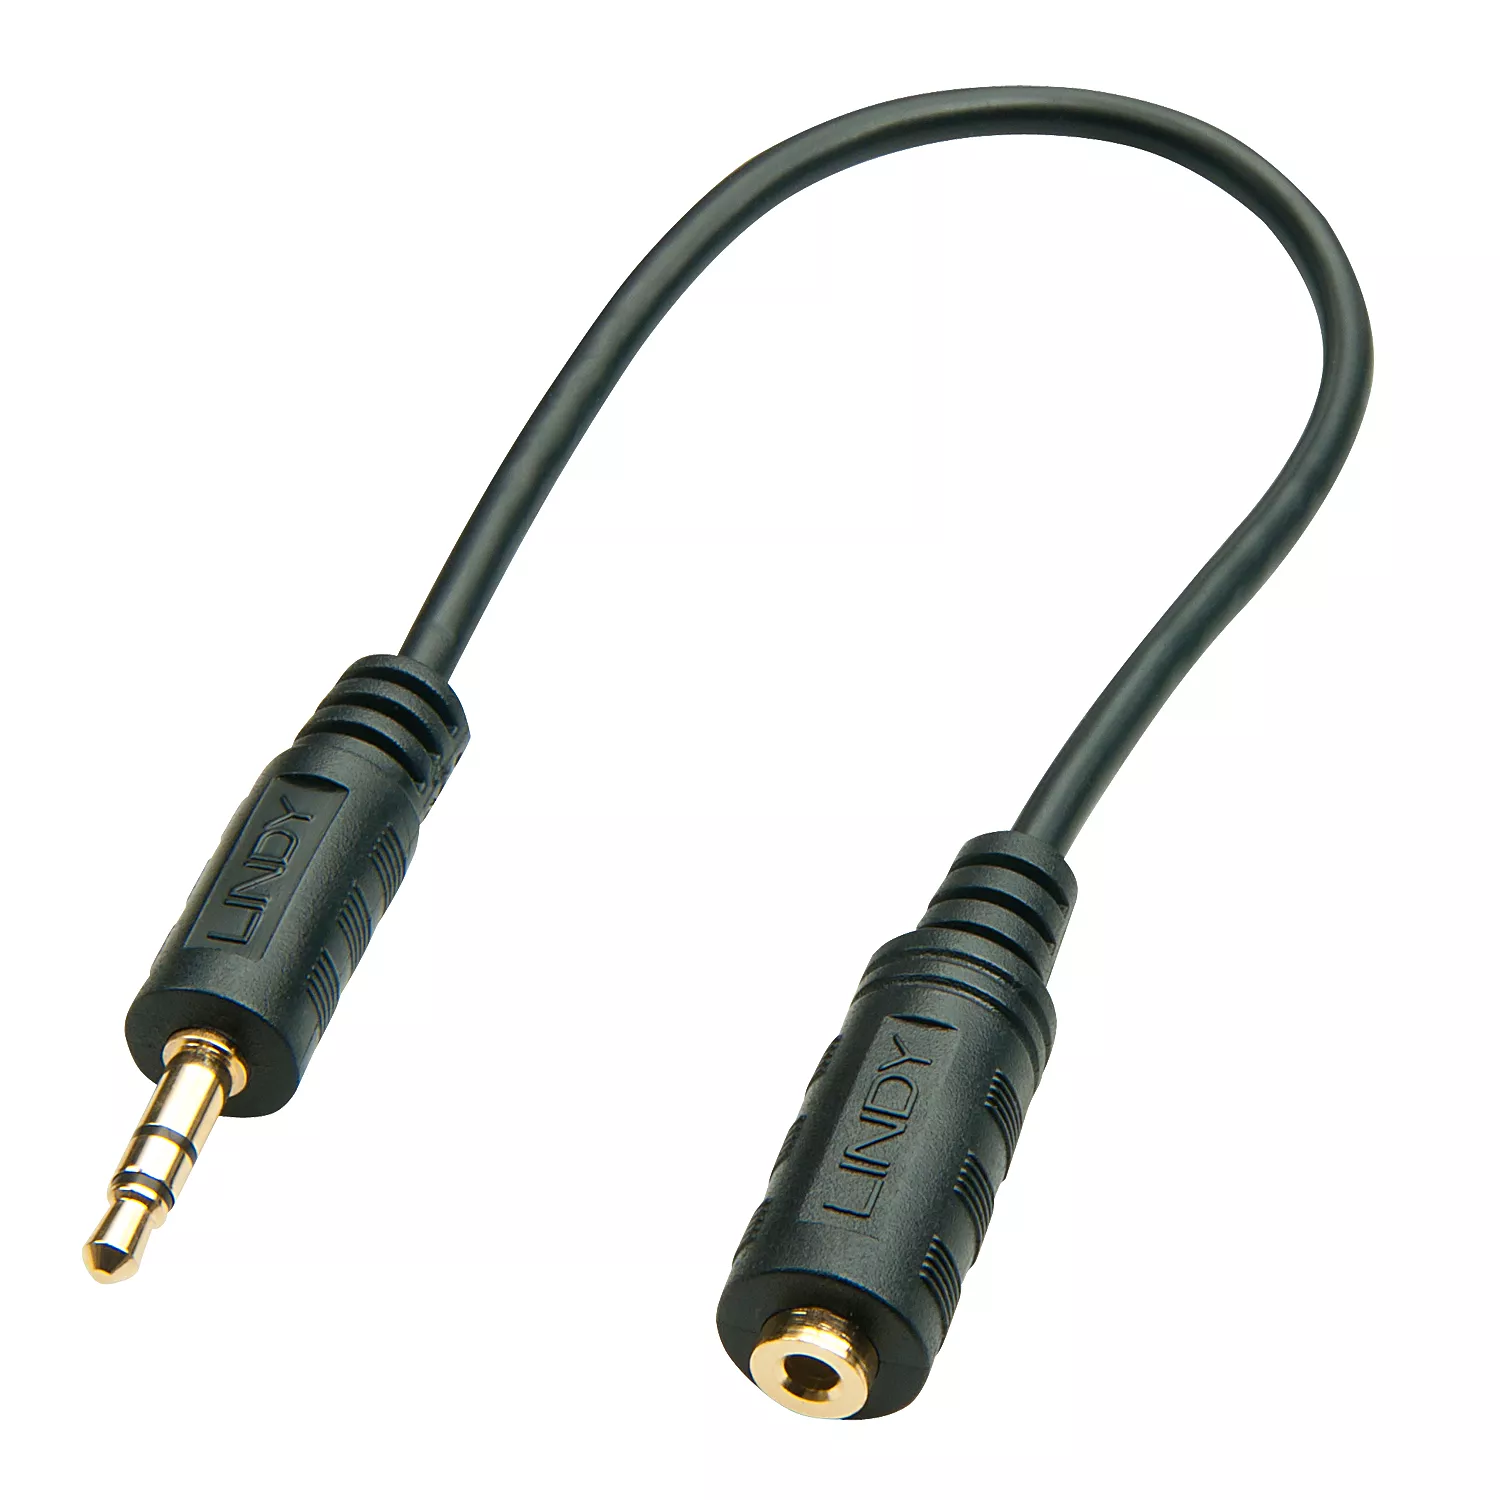 Achat Câble Audio LINDY Audio Adapter Cable 3.5mm Male / 2.5mm Female